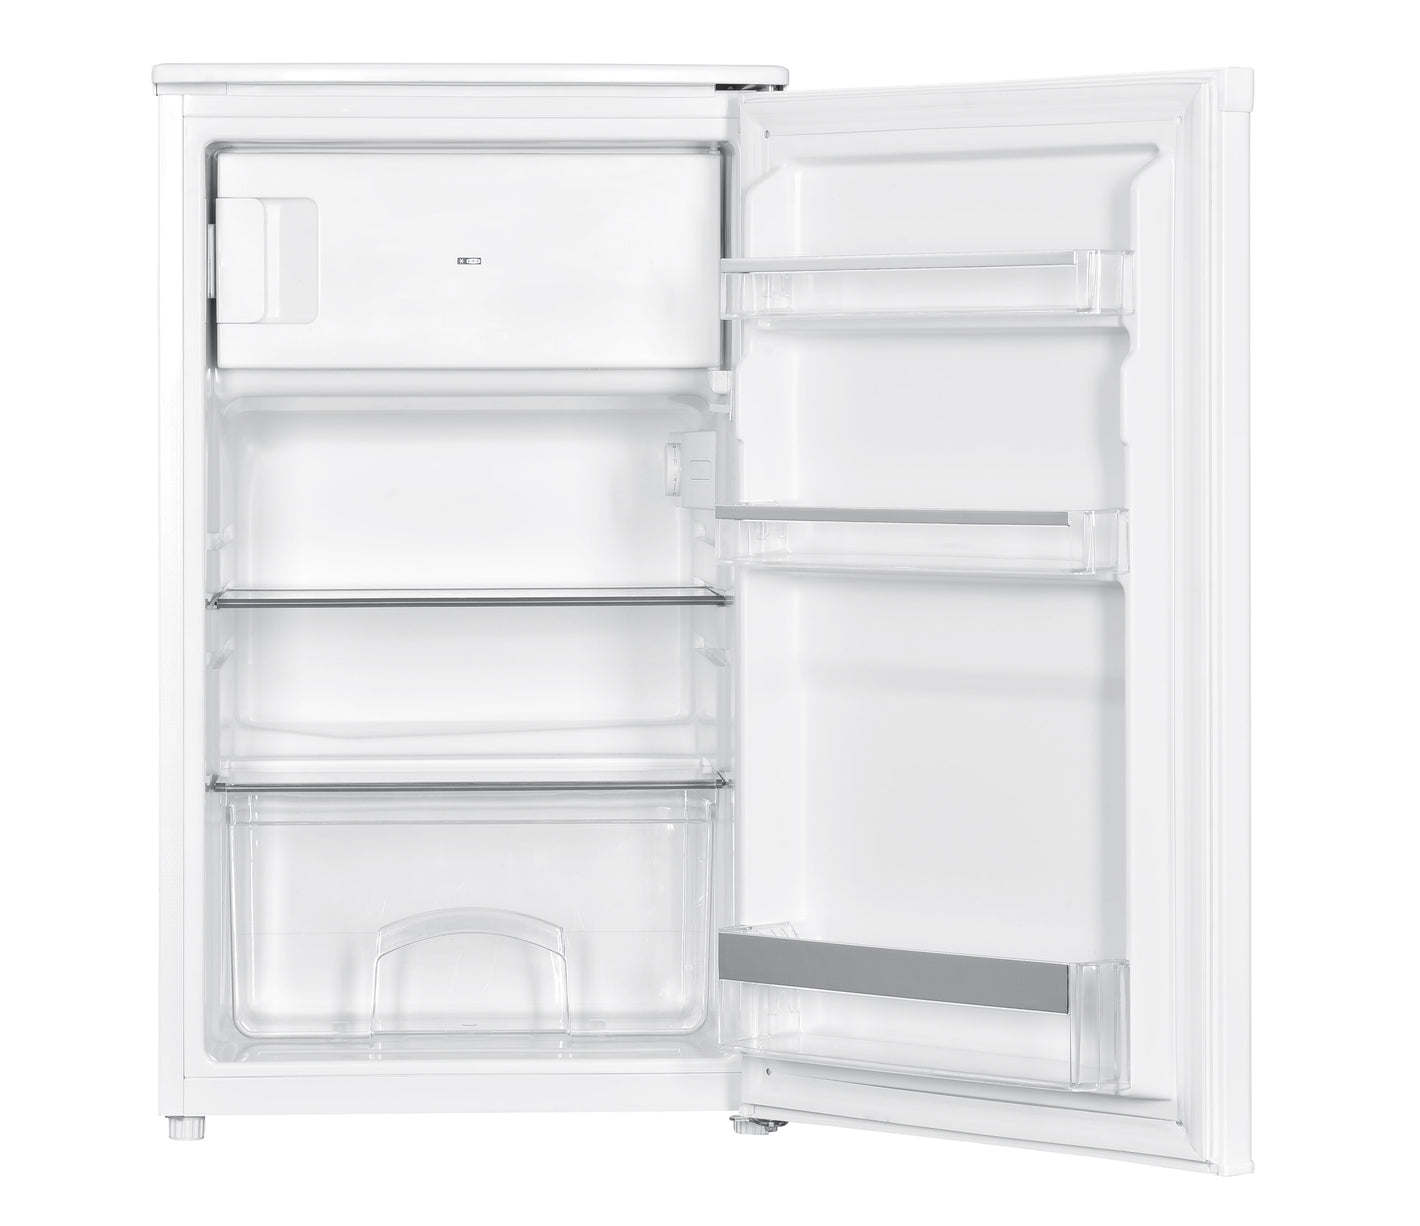 Belling  92 Litre  50cm wide Under counter fridge with freezer | BR90WH